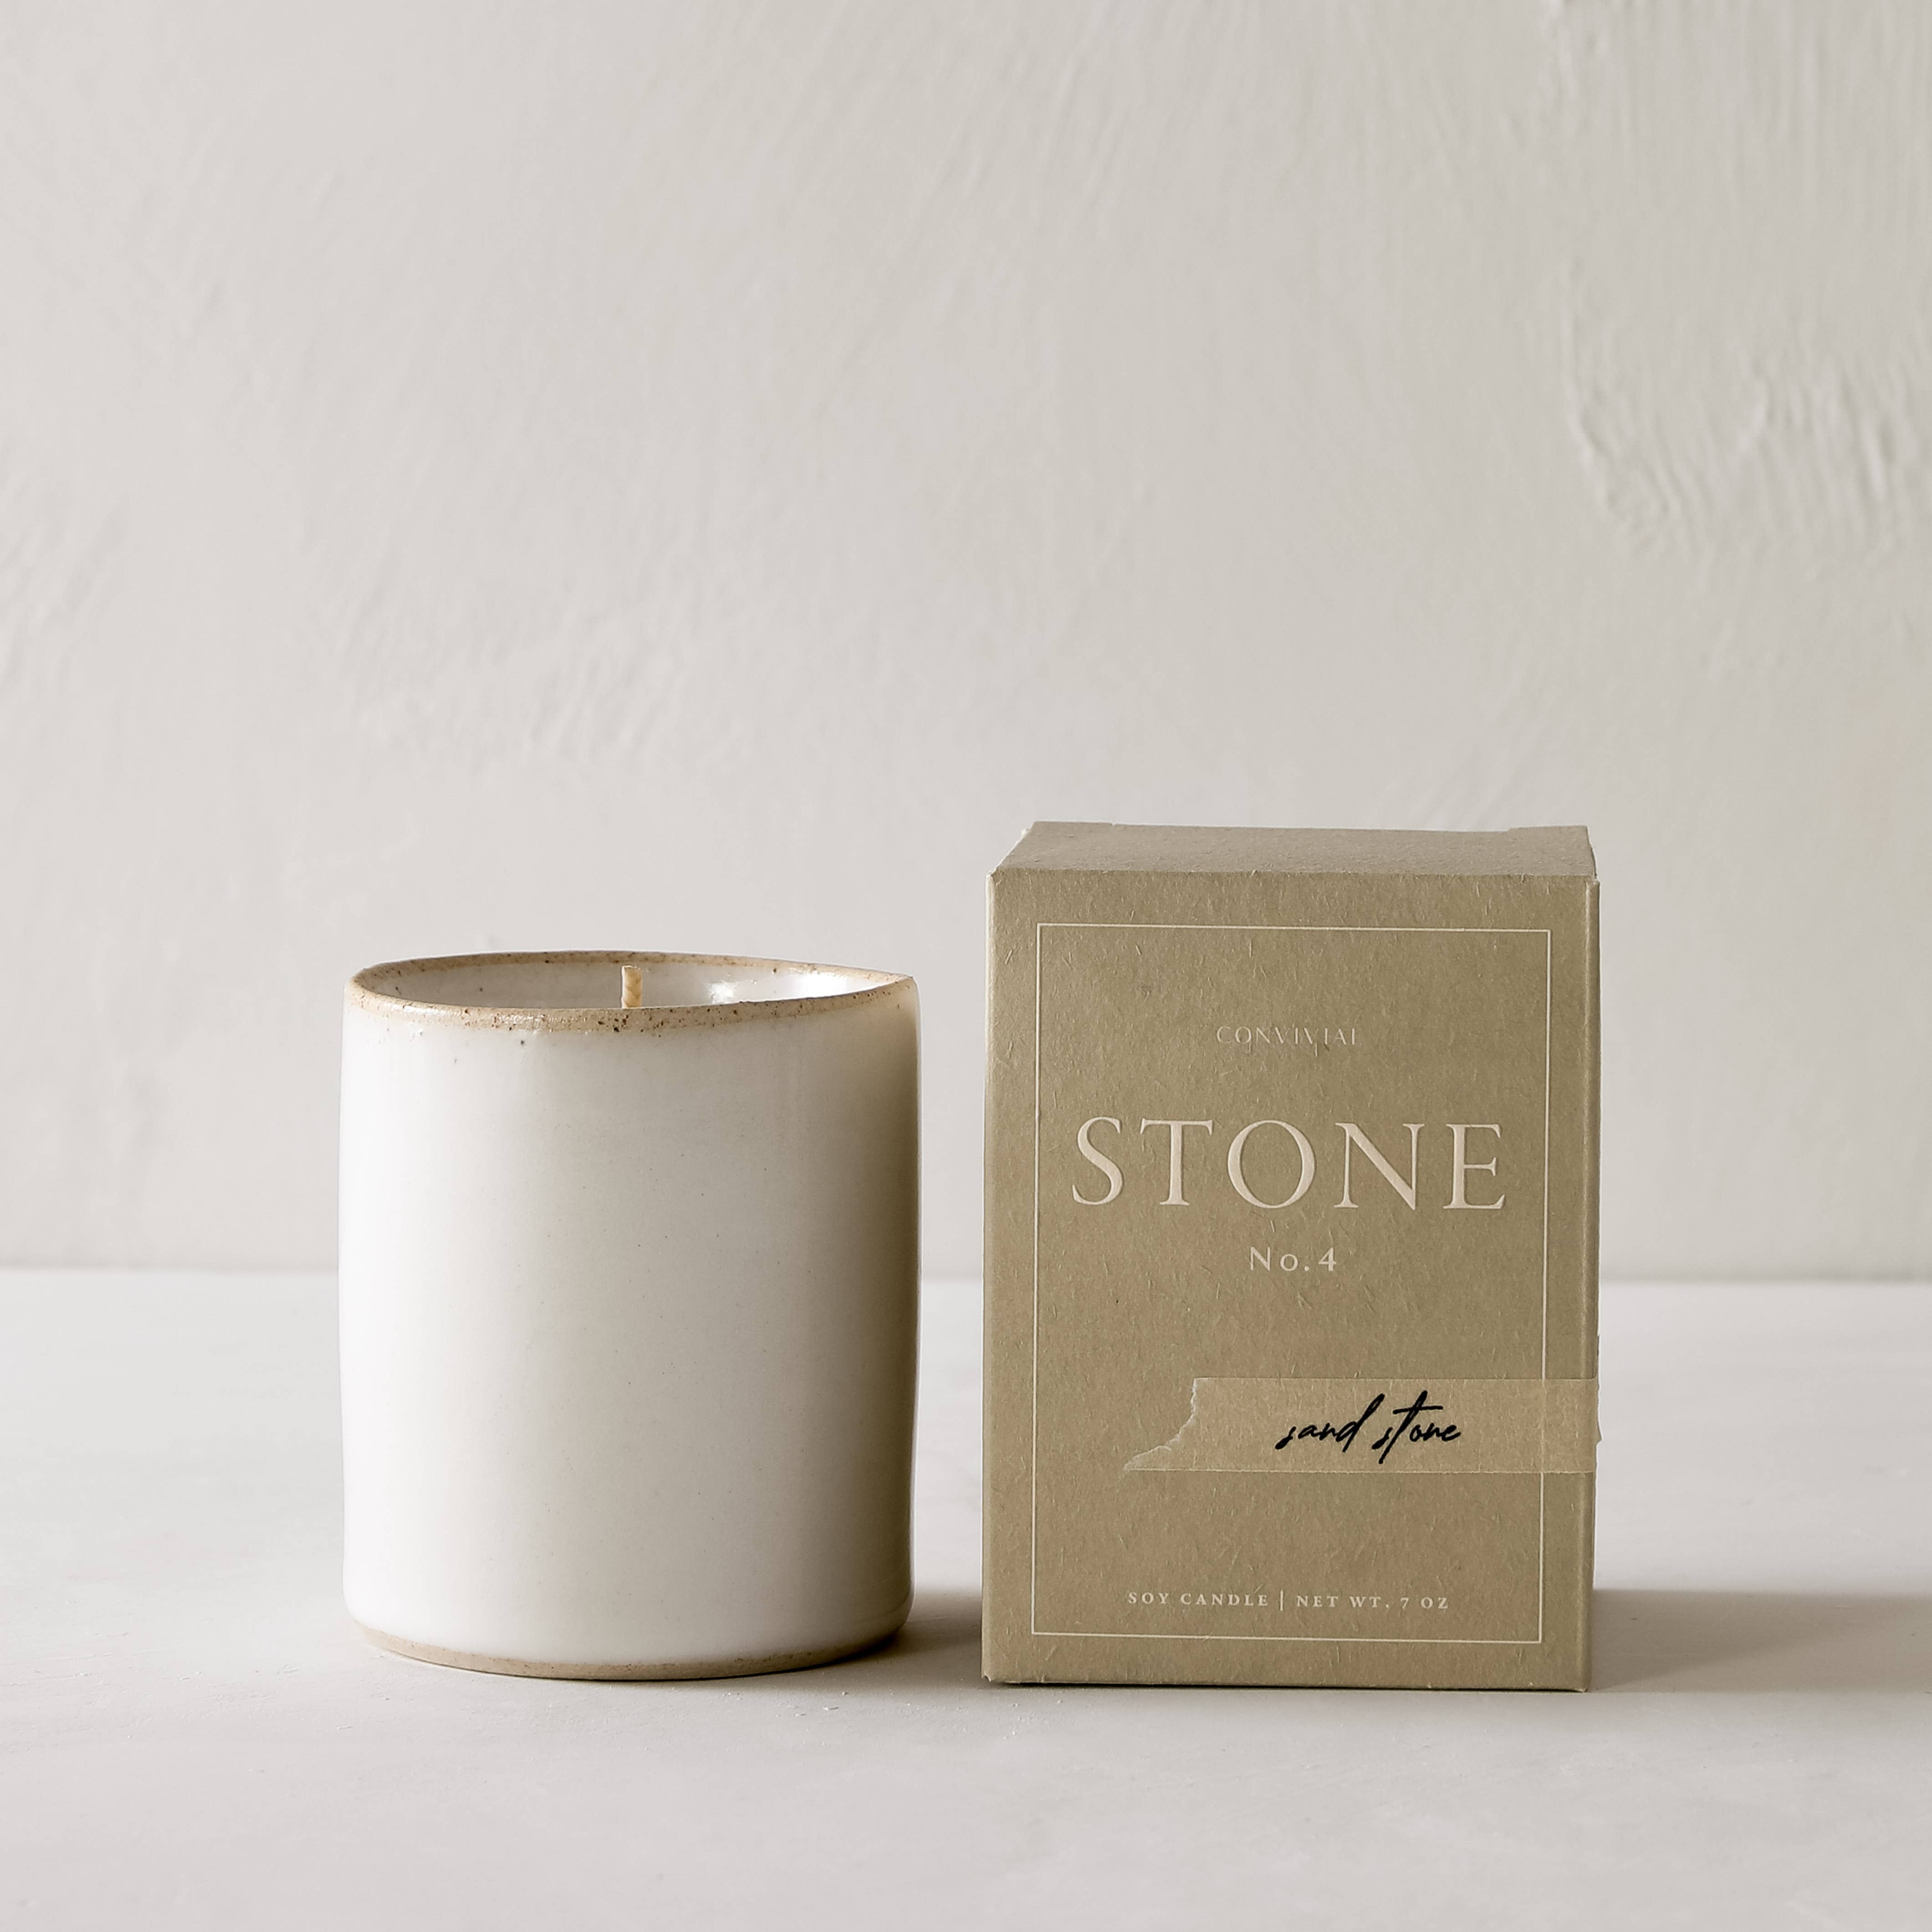 HAND-CRAFTED CANDLES IN STONEWARE VESSEL